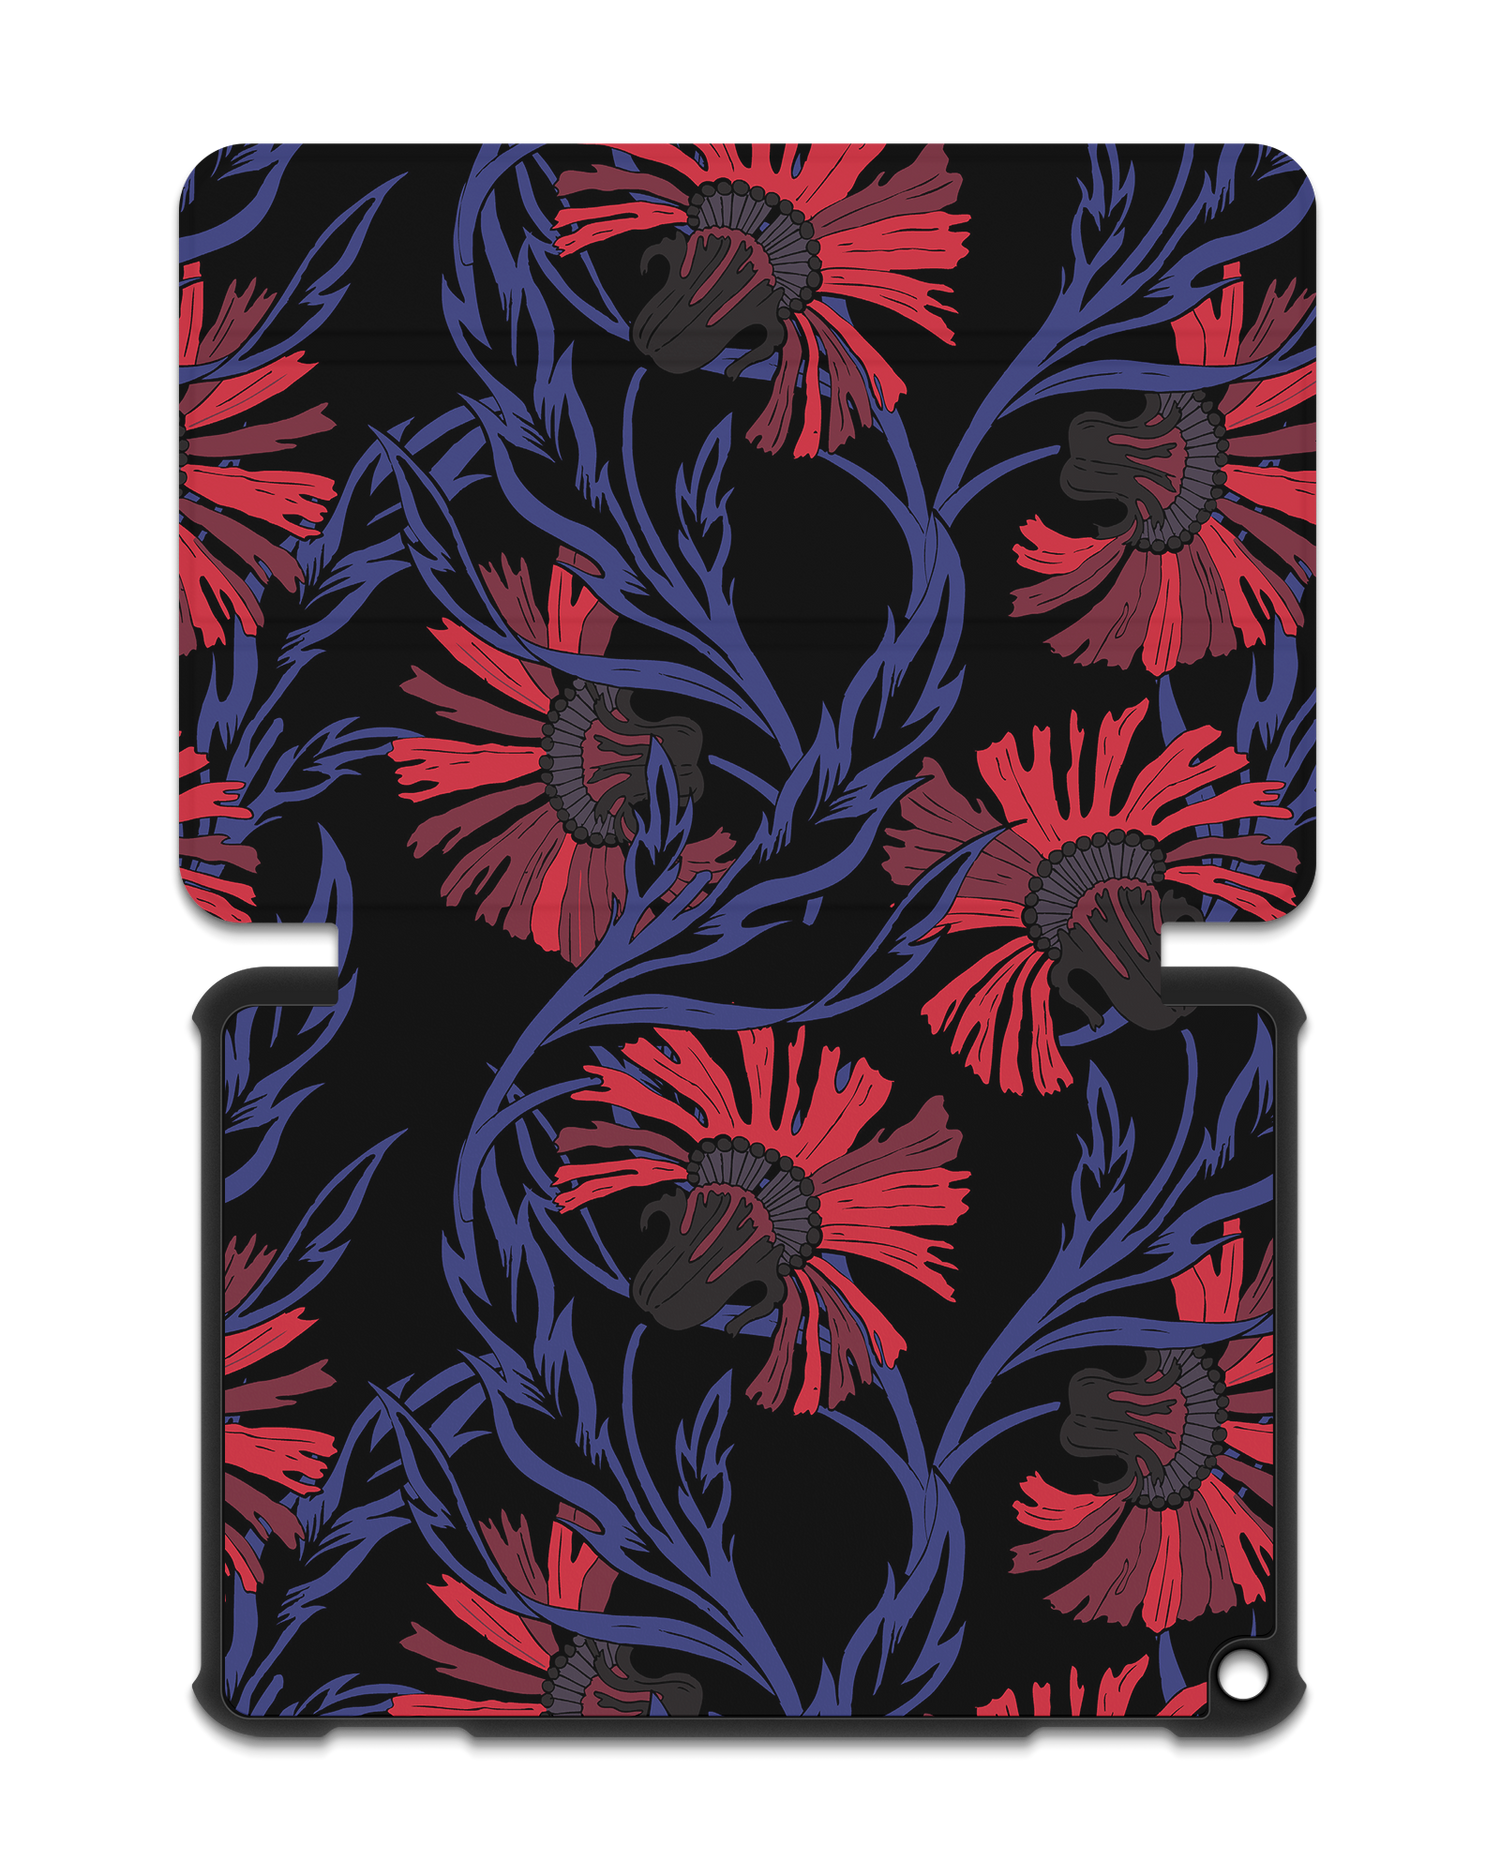 Midnight Floral Tablet Smart Case for Amazon Fire HD 8 (2022), Amazon Fire HD 8 Plus (2022), Amazon Fire HD 8 (2020), Amazon Fire HD 8 Plus (2020): Opened